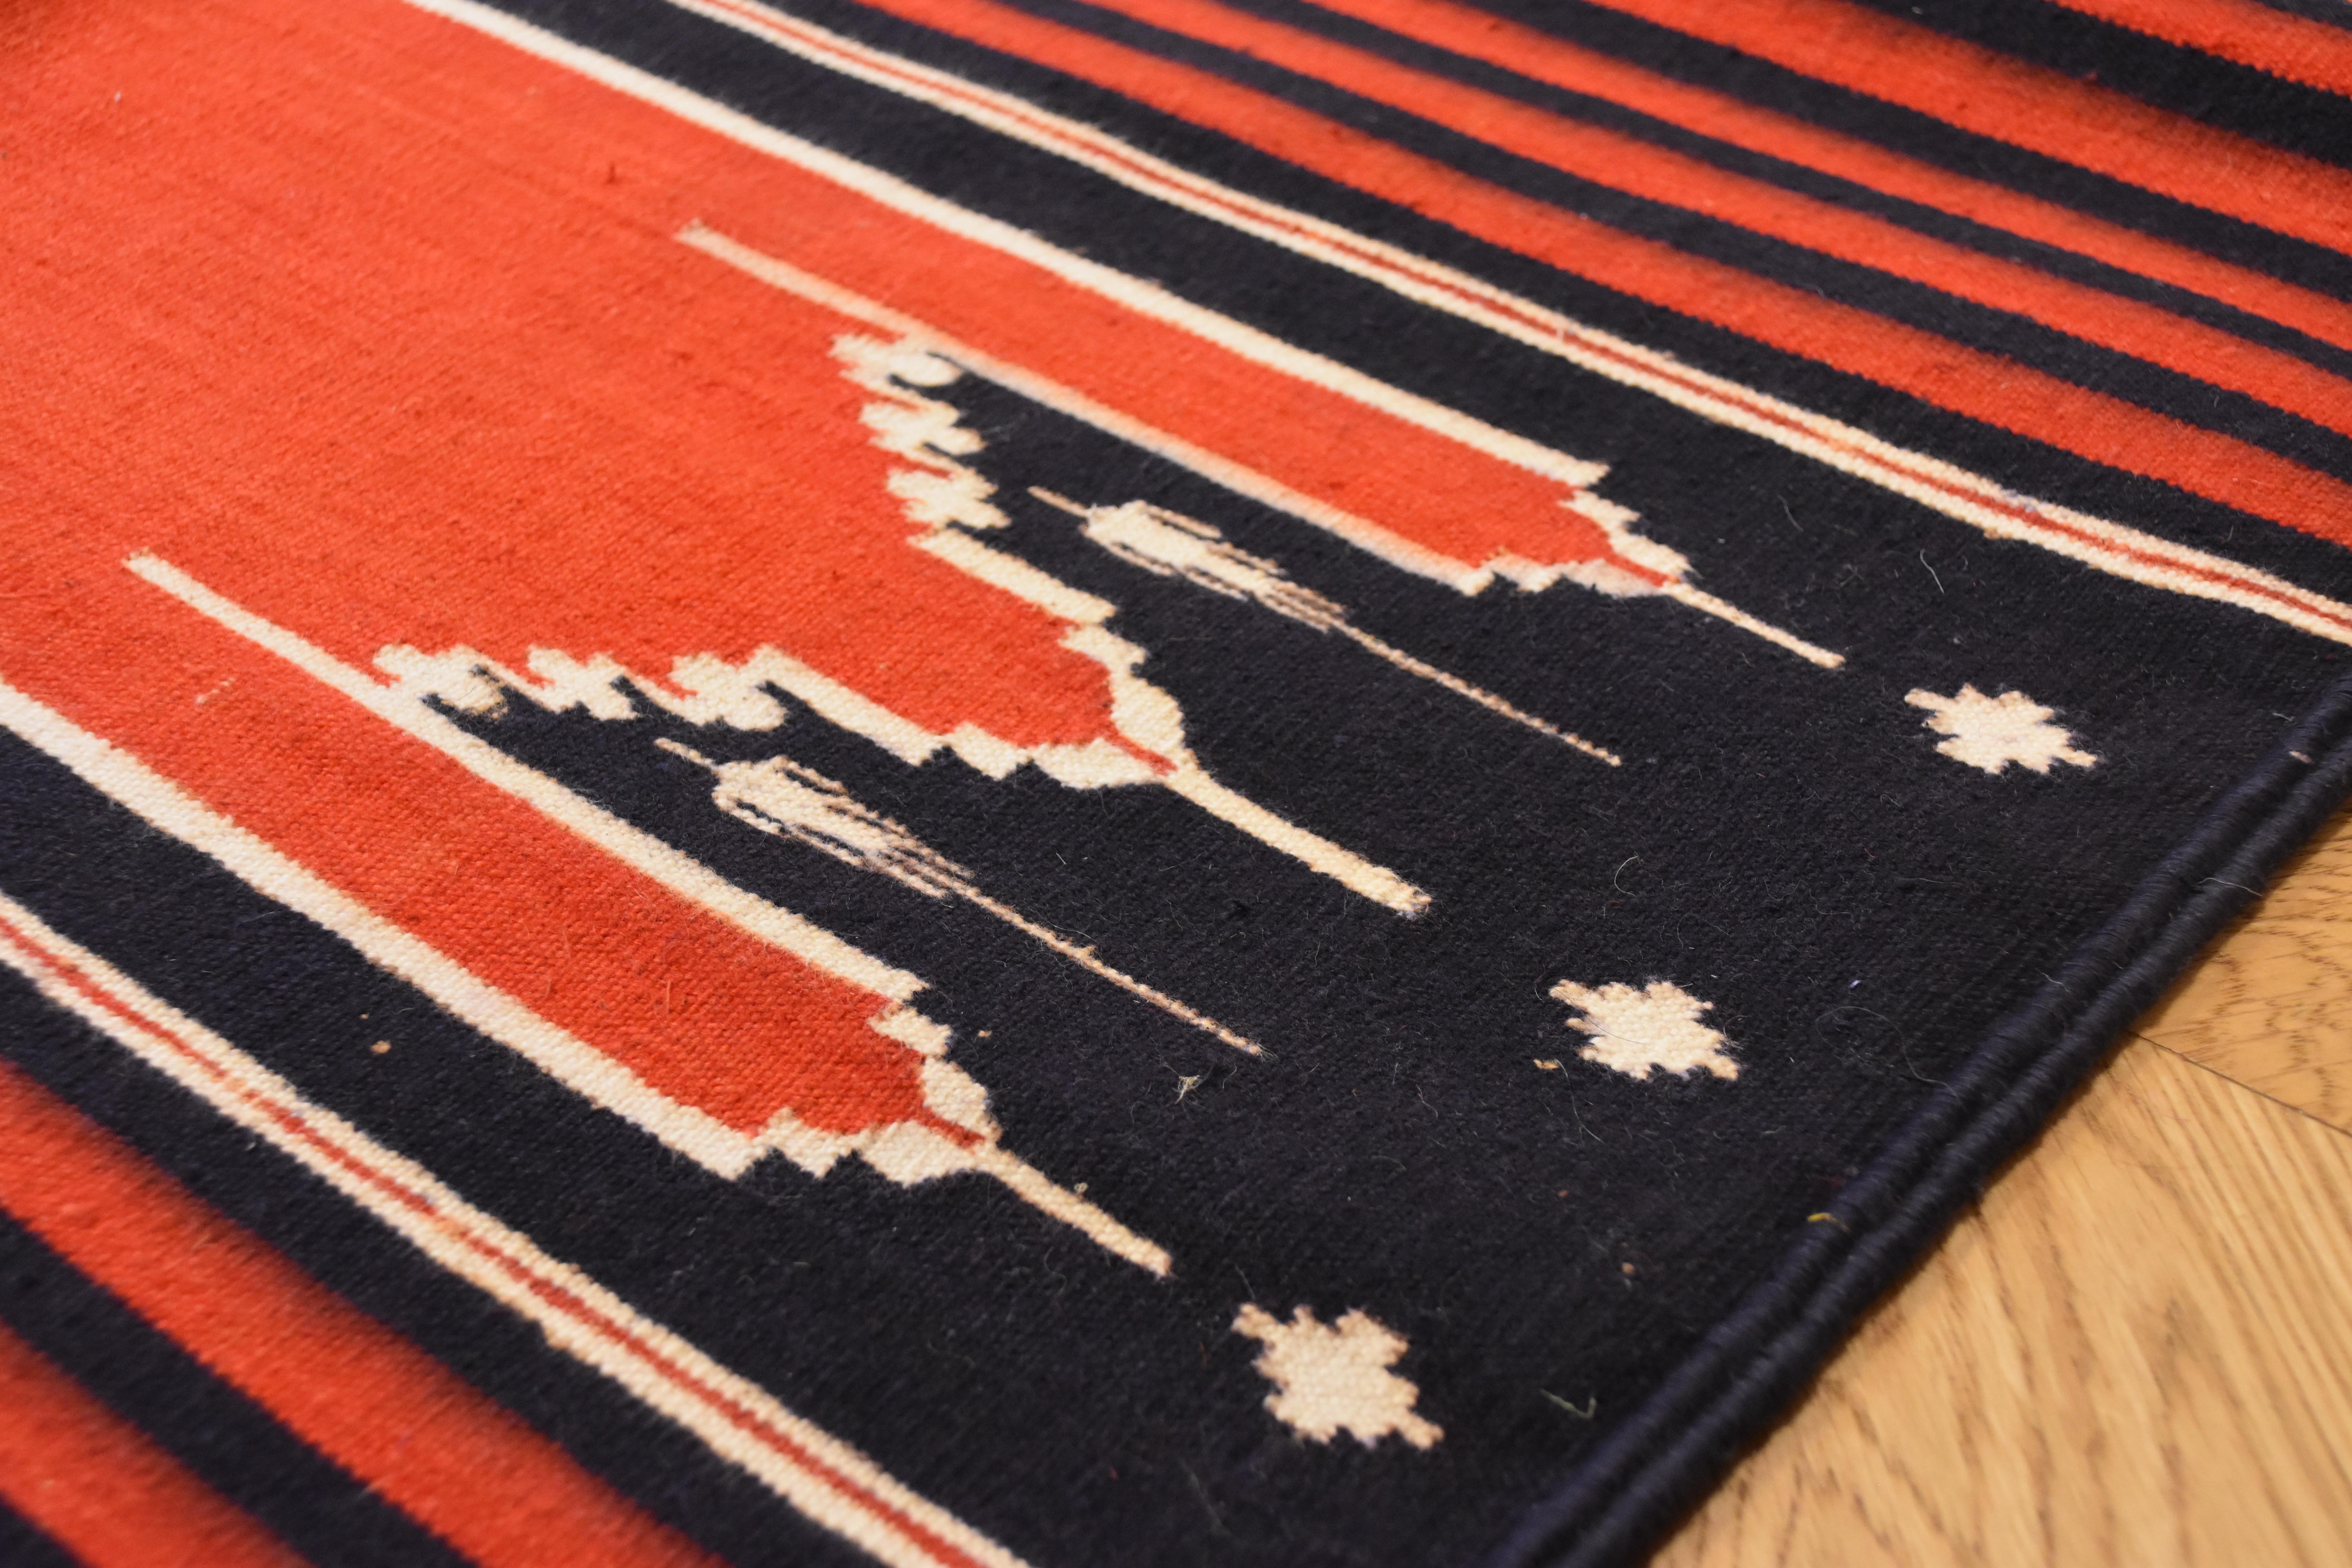 20th Century Red, White and Blue Dhurrie Saf Runner Mehrab Rug from India, 1970s For Sale 2